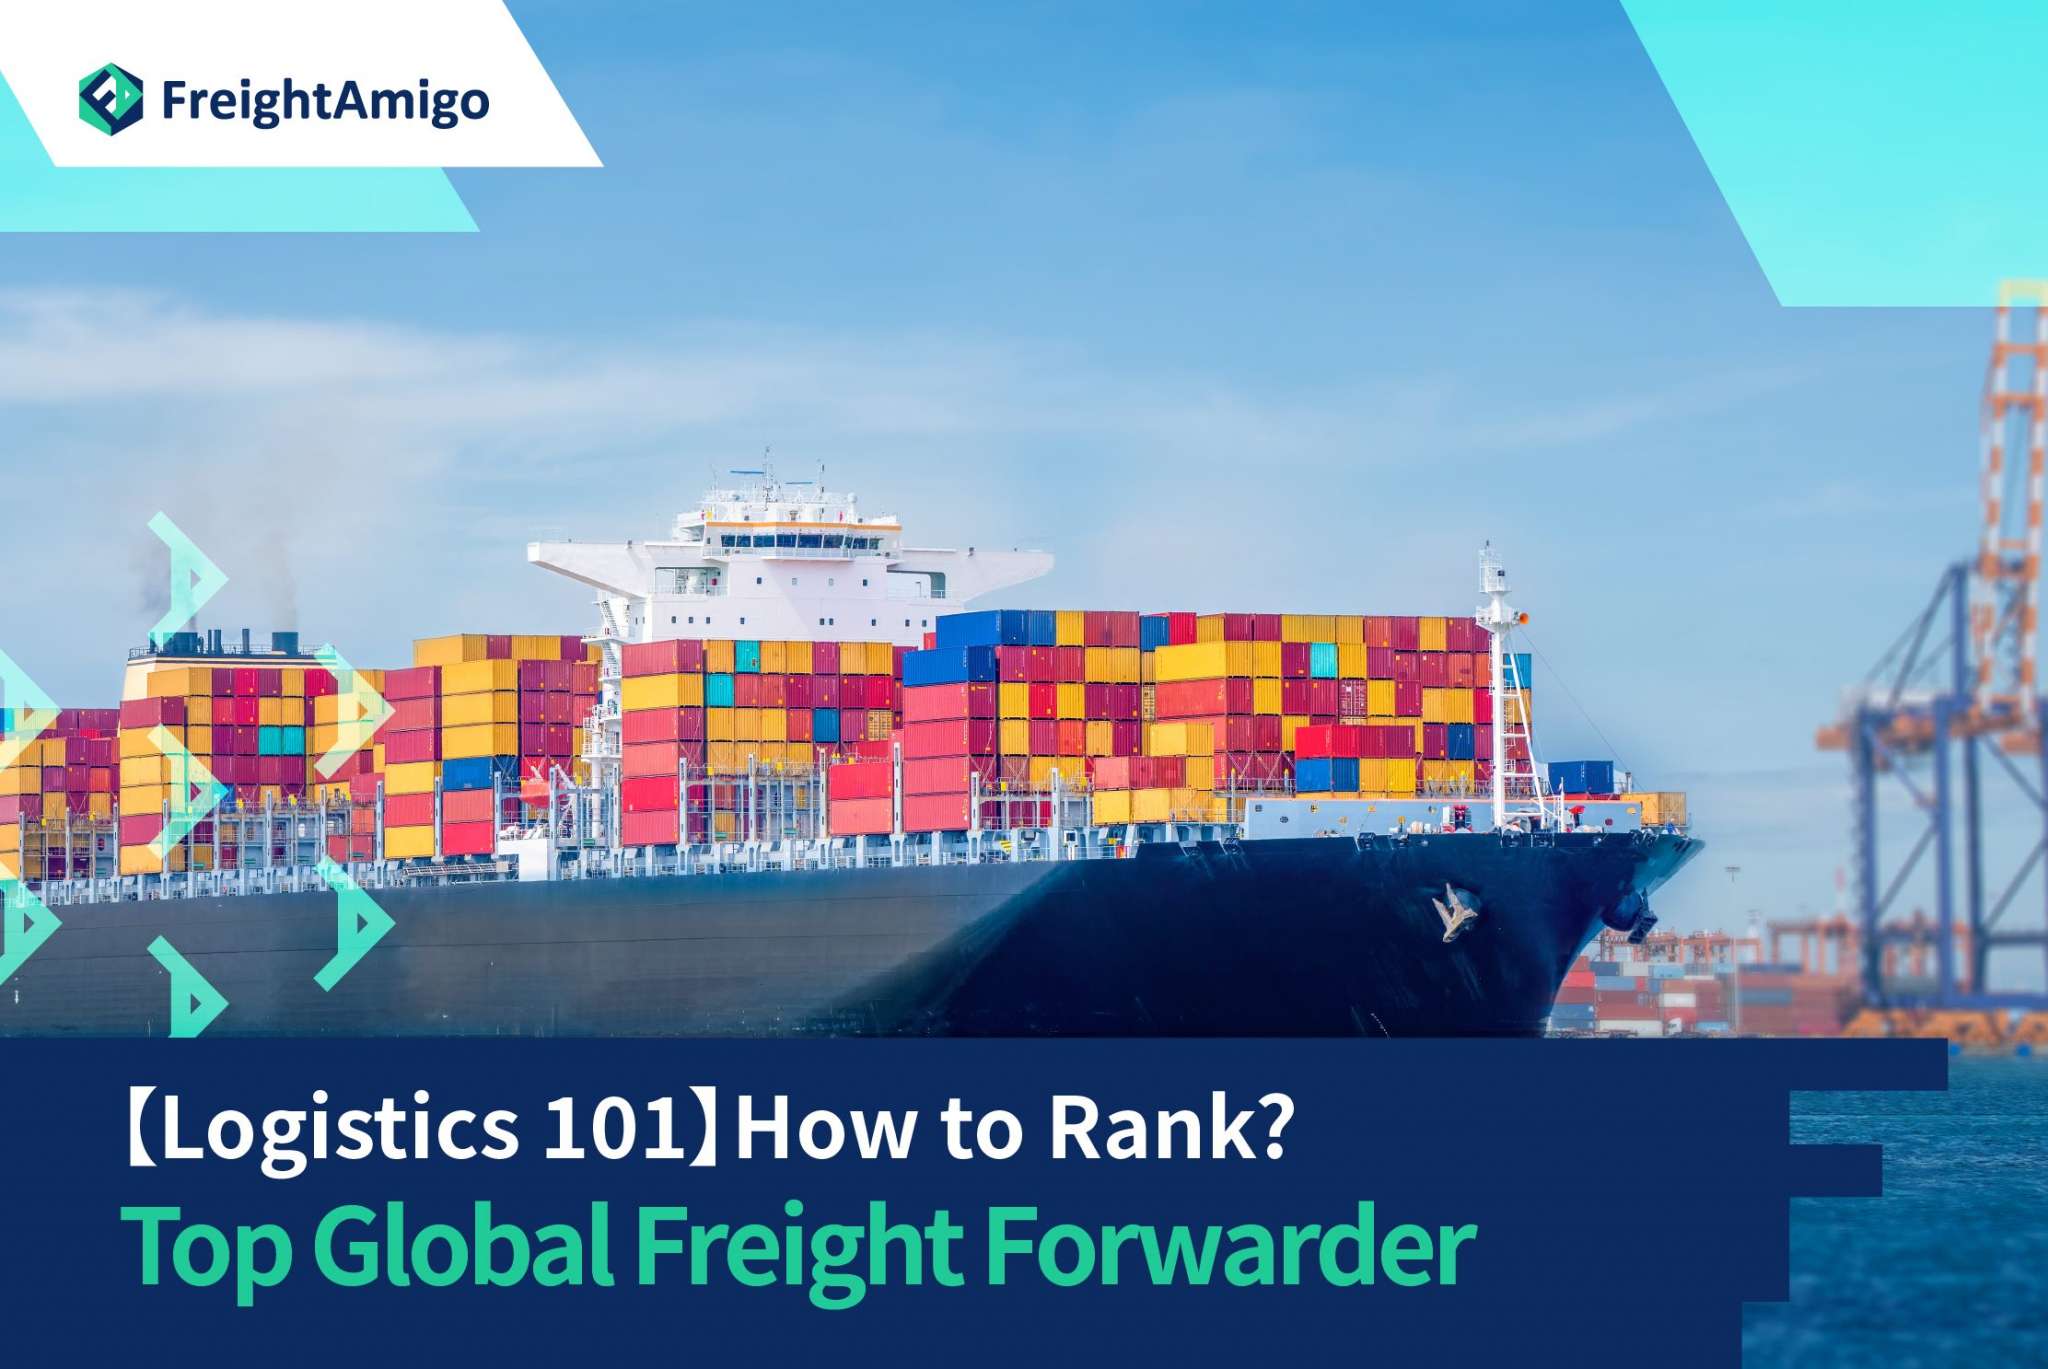 【Logistics 101】How to Rank? Top 5 Global Freight Forwarder